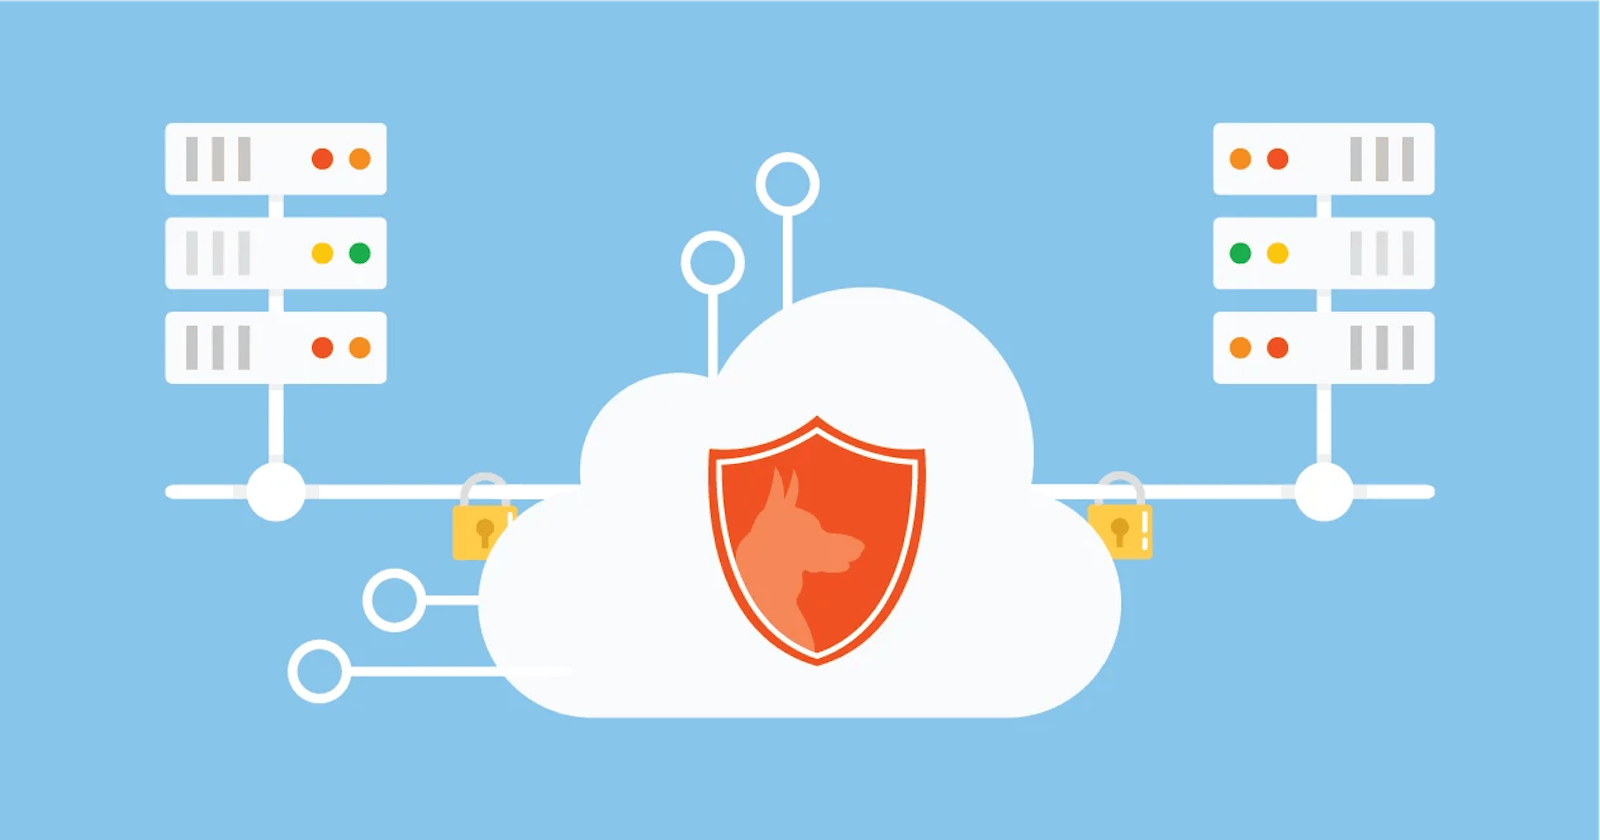 🛡️ How to Protect Data with Features in Alibaba Cloud? 🔒